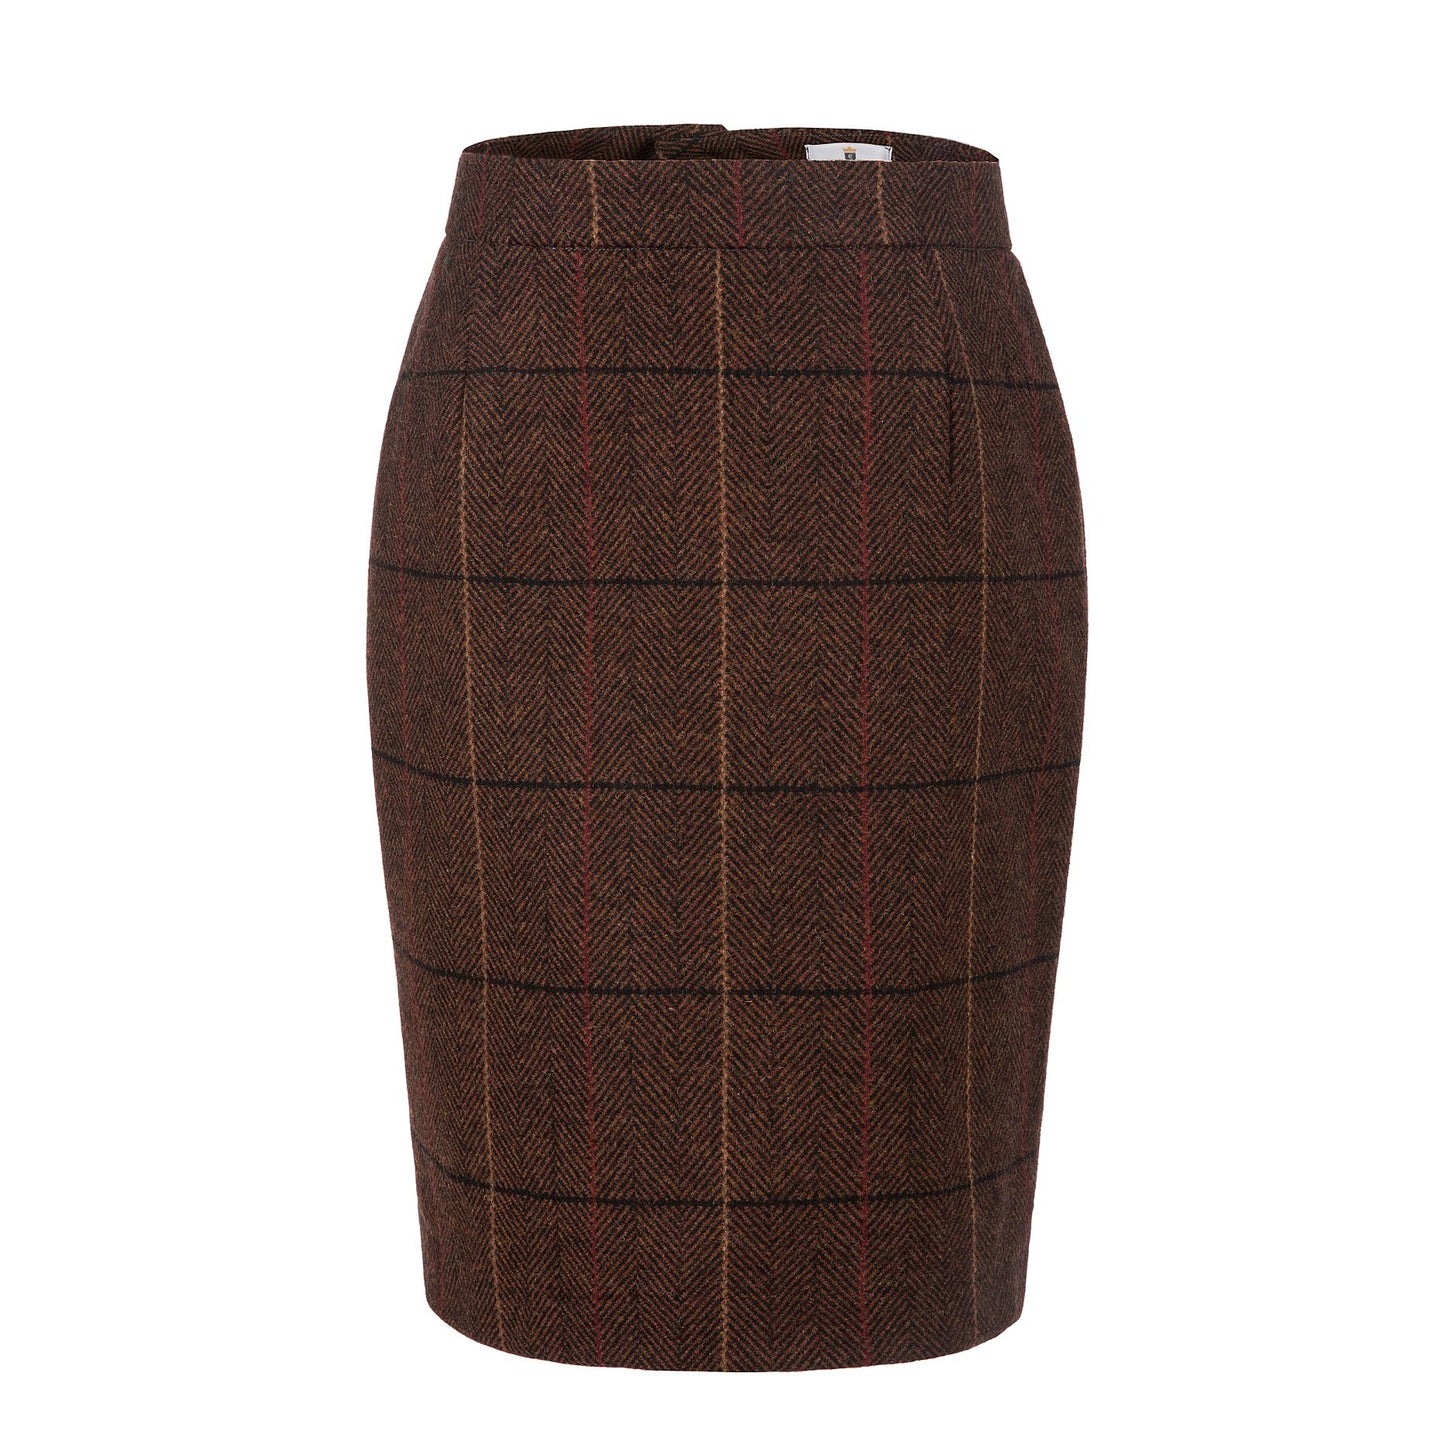 Brown Overcheck Twill Tweed Suit Womens